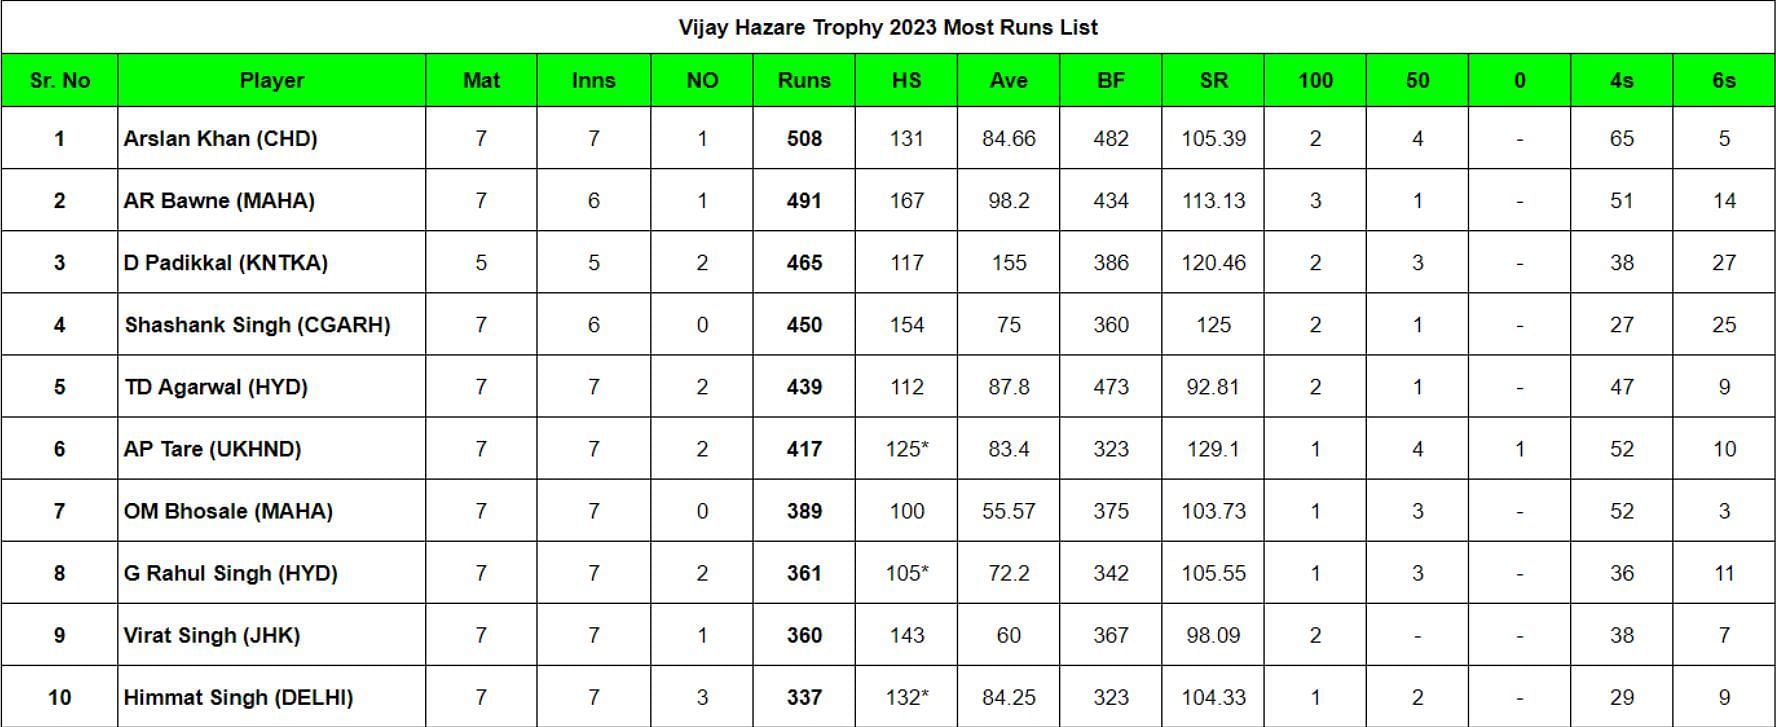 Vijay Hazare Trophy 2023: Top run-getters and wicket-takers after Day 7 (Updated) ft. Arslan Khan and Siddharth Kaul